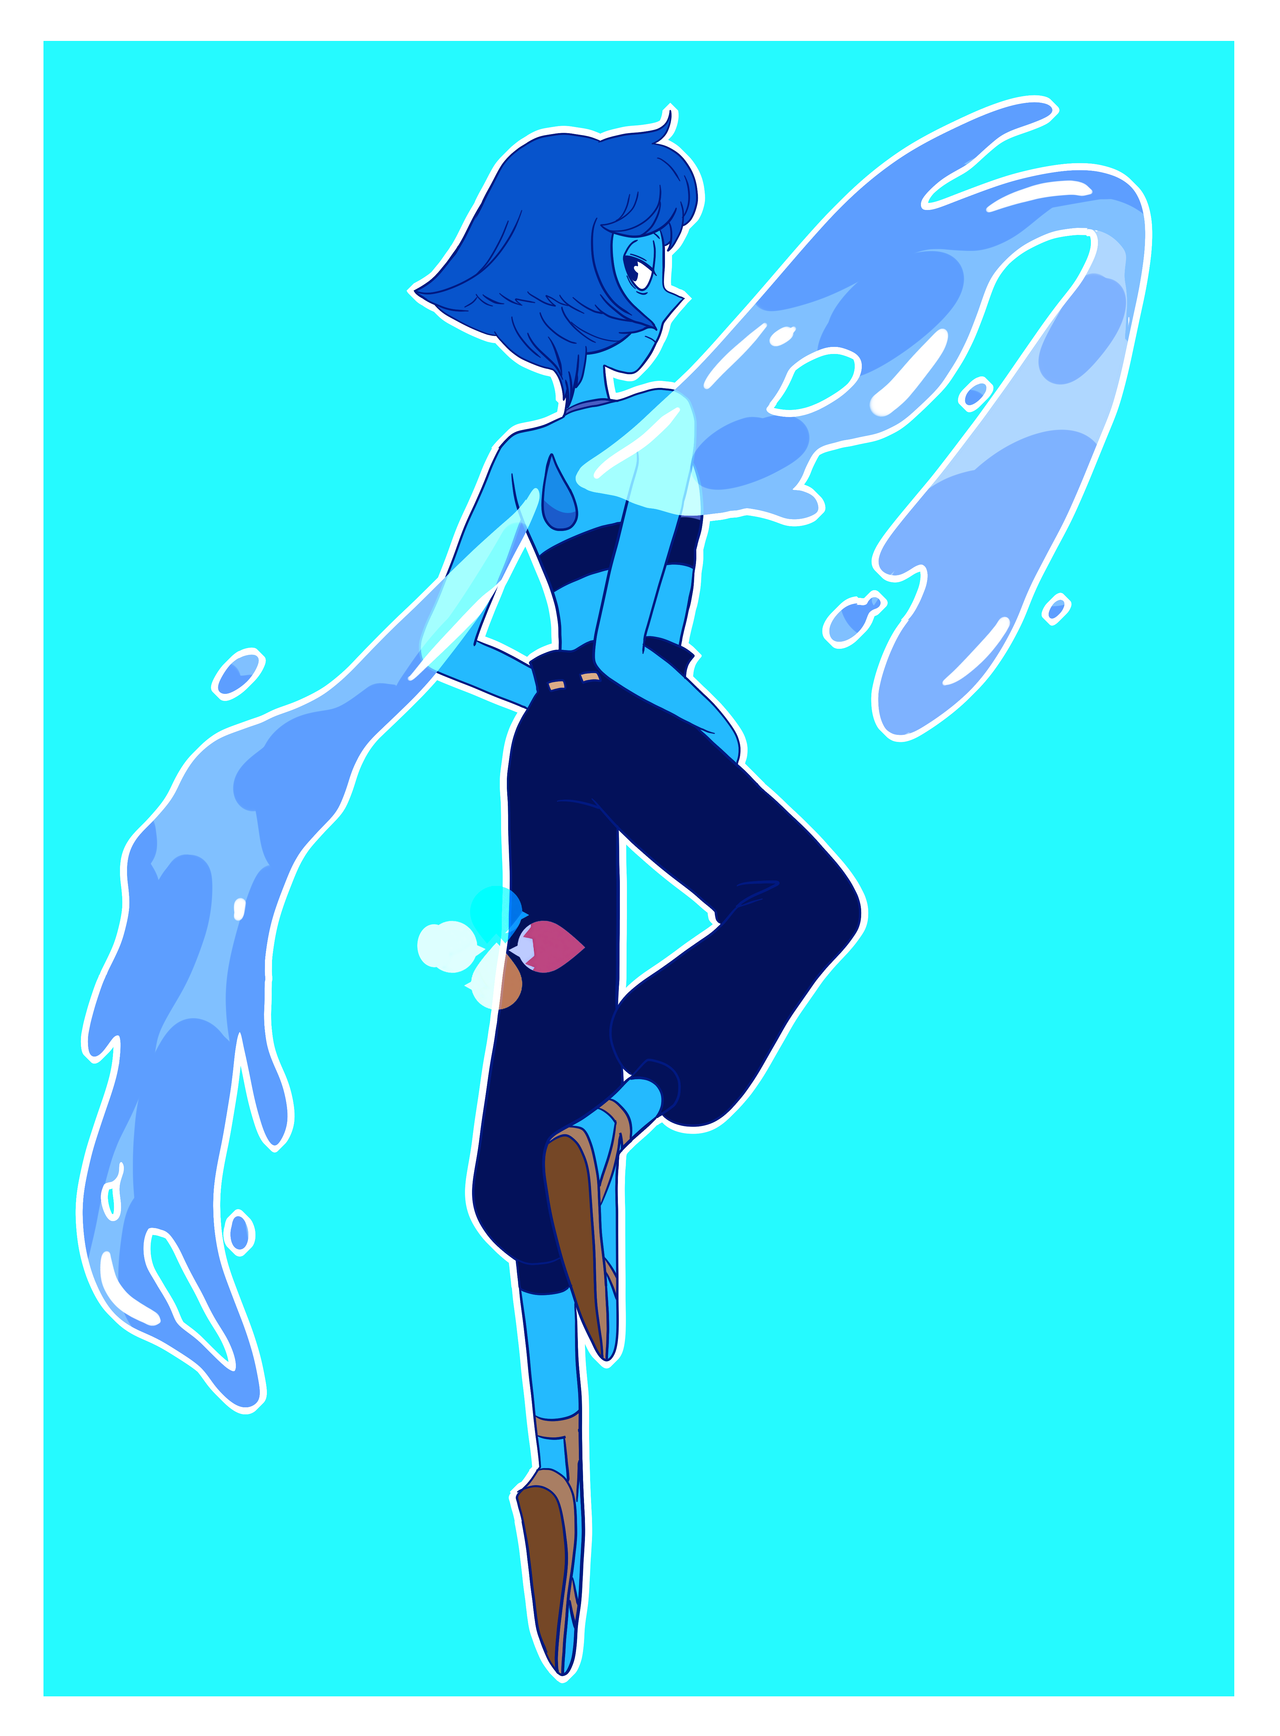 commission for @paragayyy of Lapis!